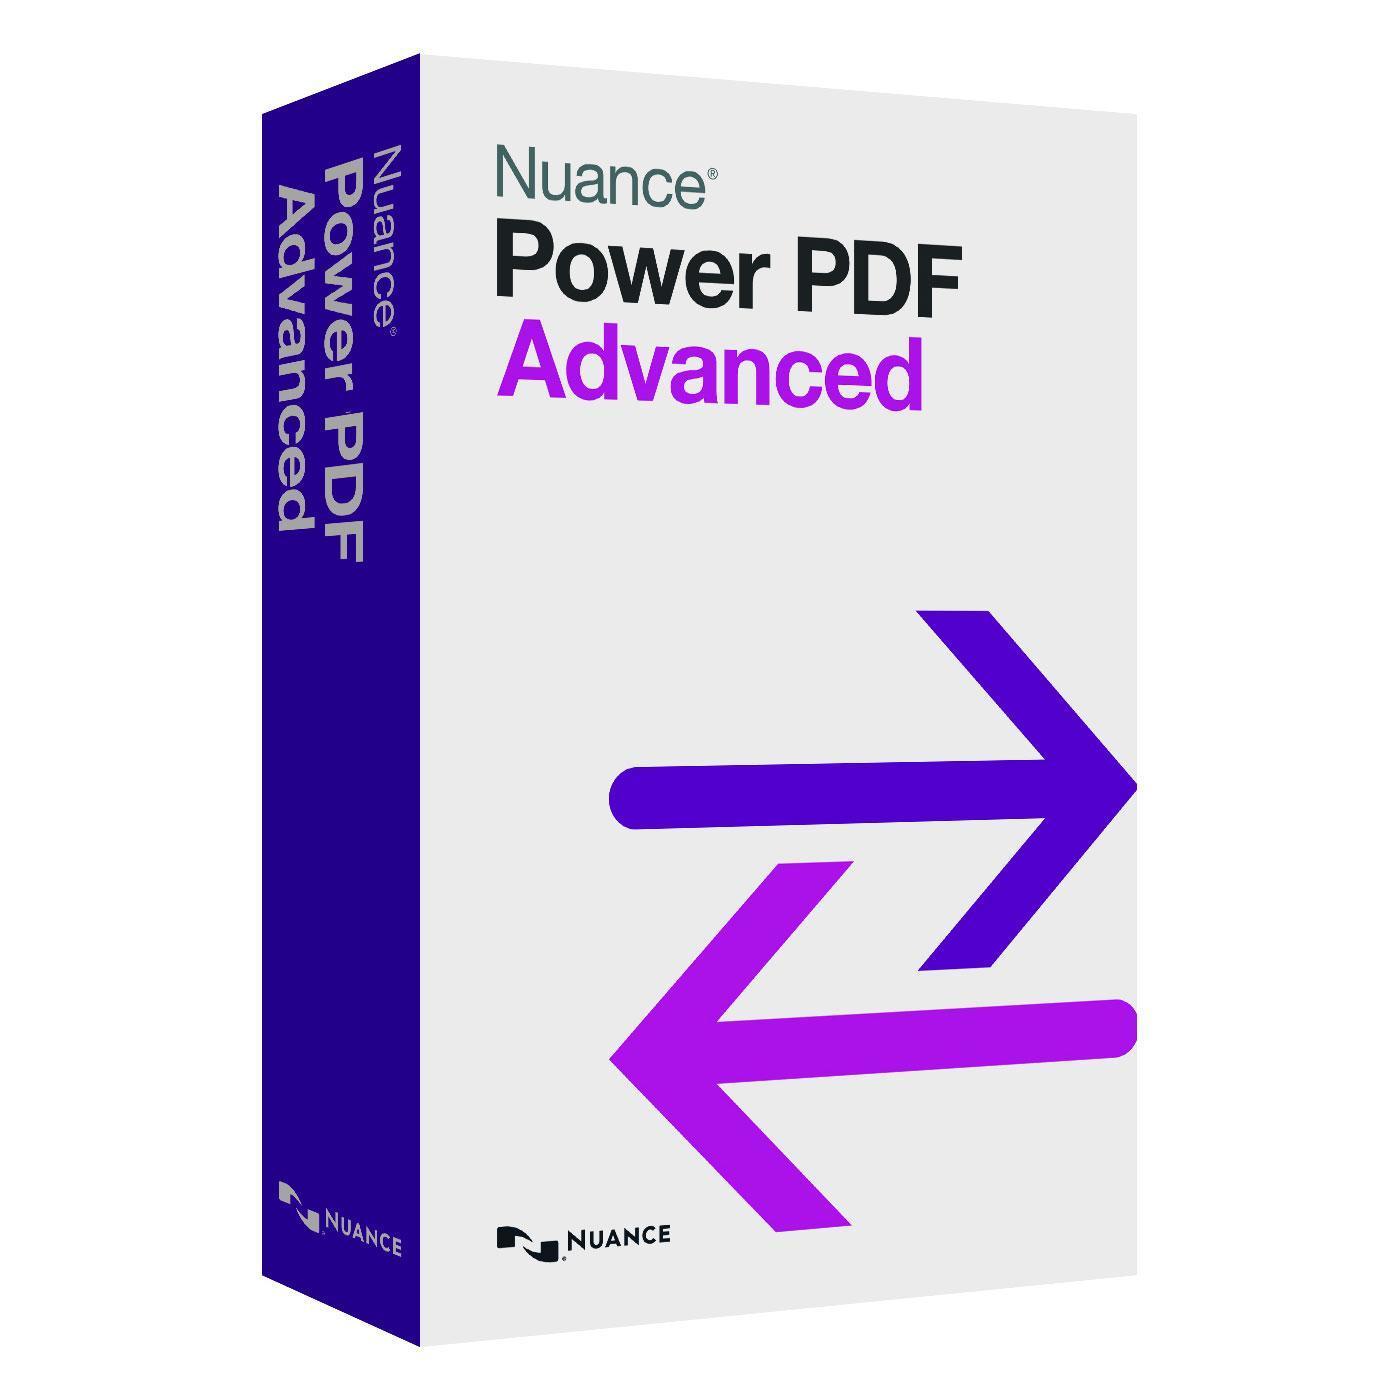 Primary image for Nuance Power PDF Advanced 1.x | Digital Software Key - FAST DELIVERY 24h Max.